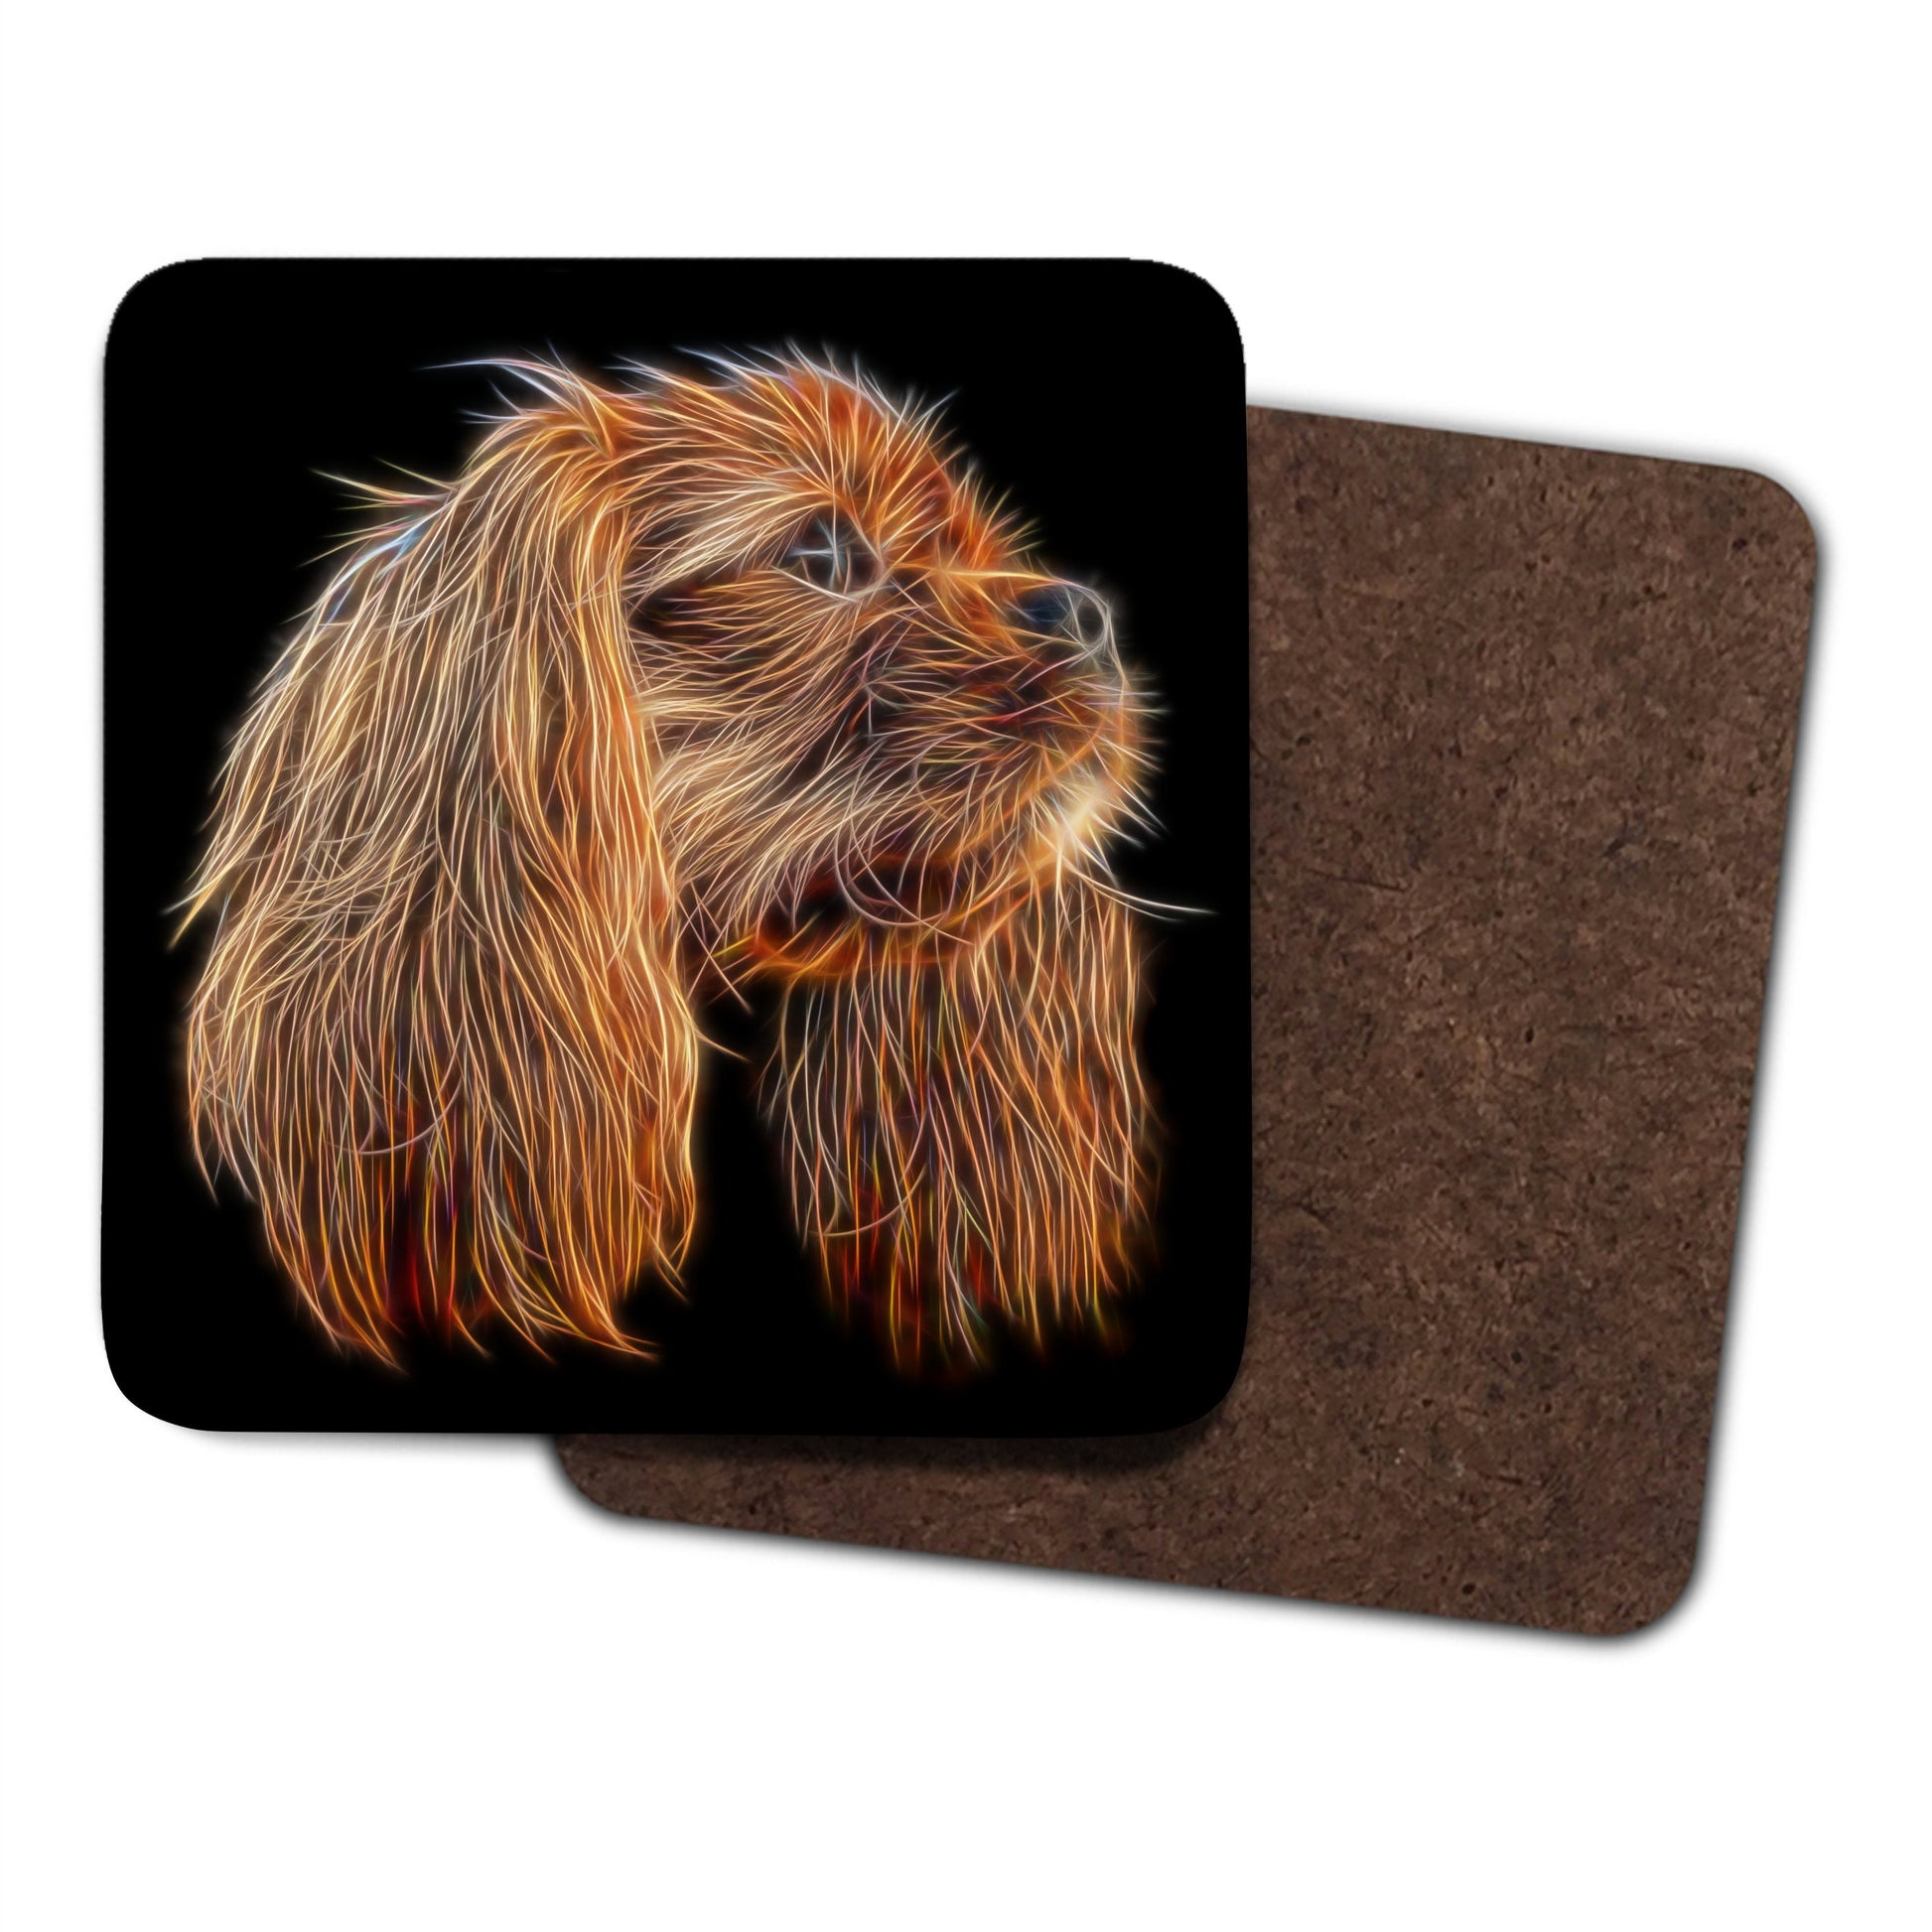 Ruby King Charles Spaniel Coasters, Set of 2, with Fractal Art Design